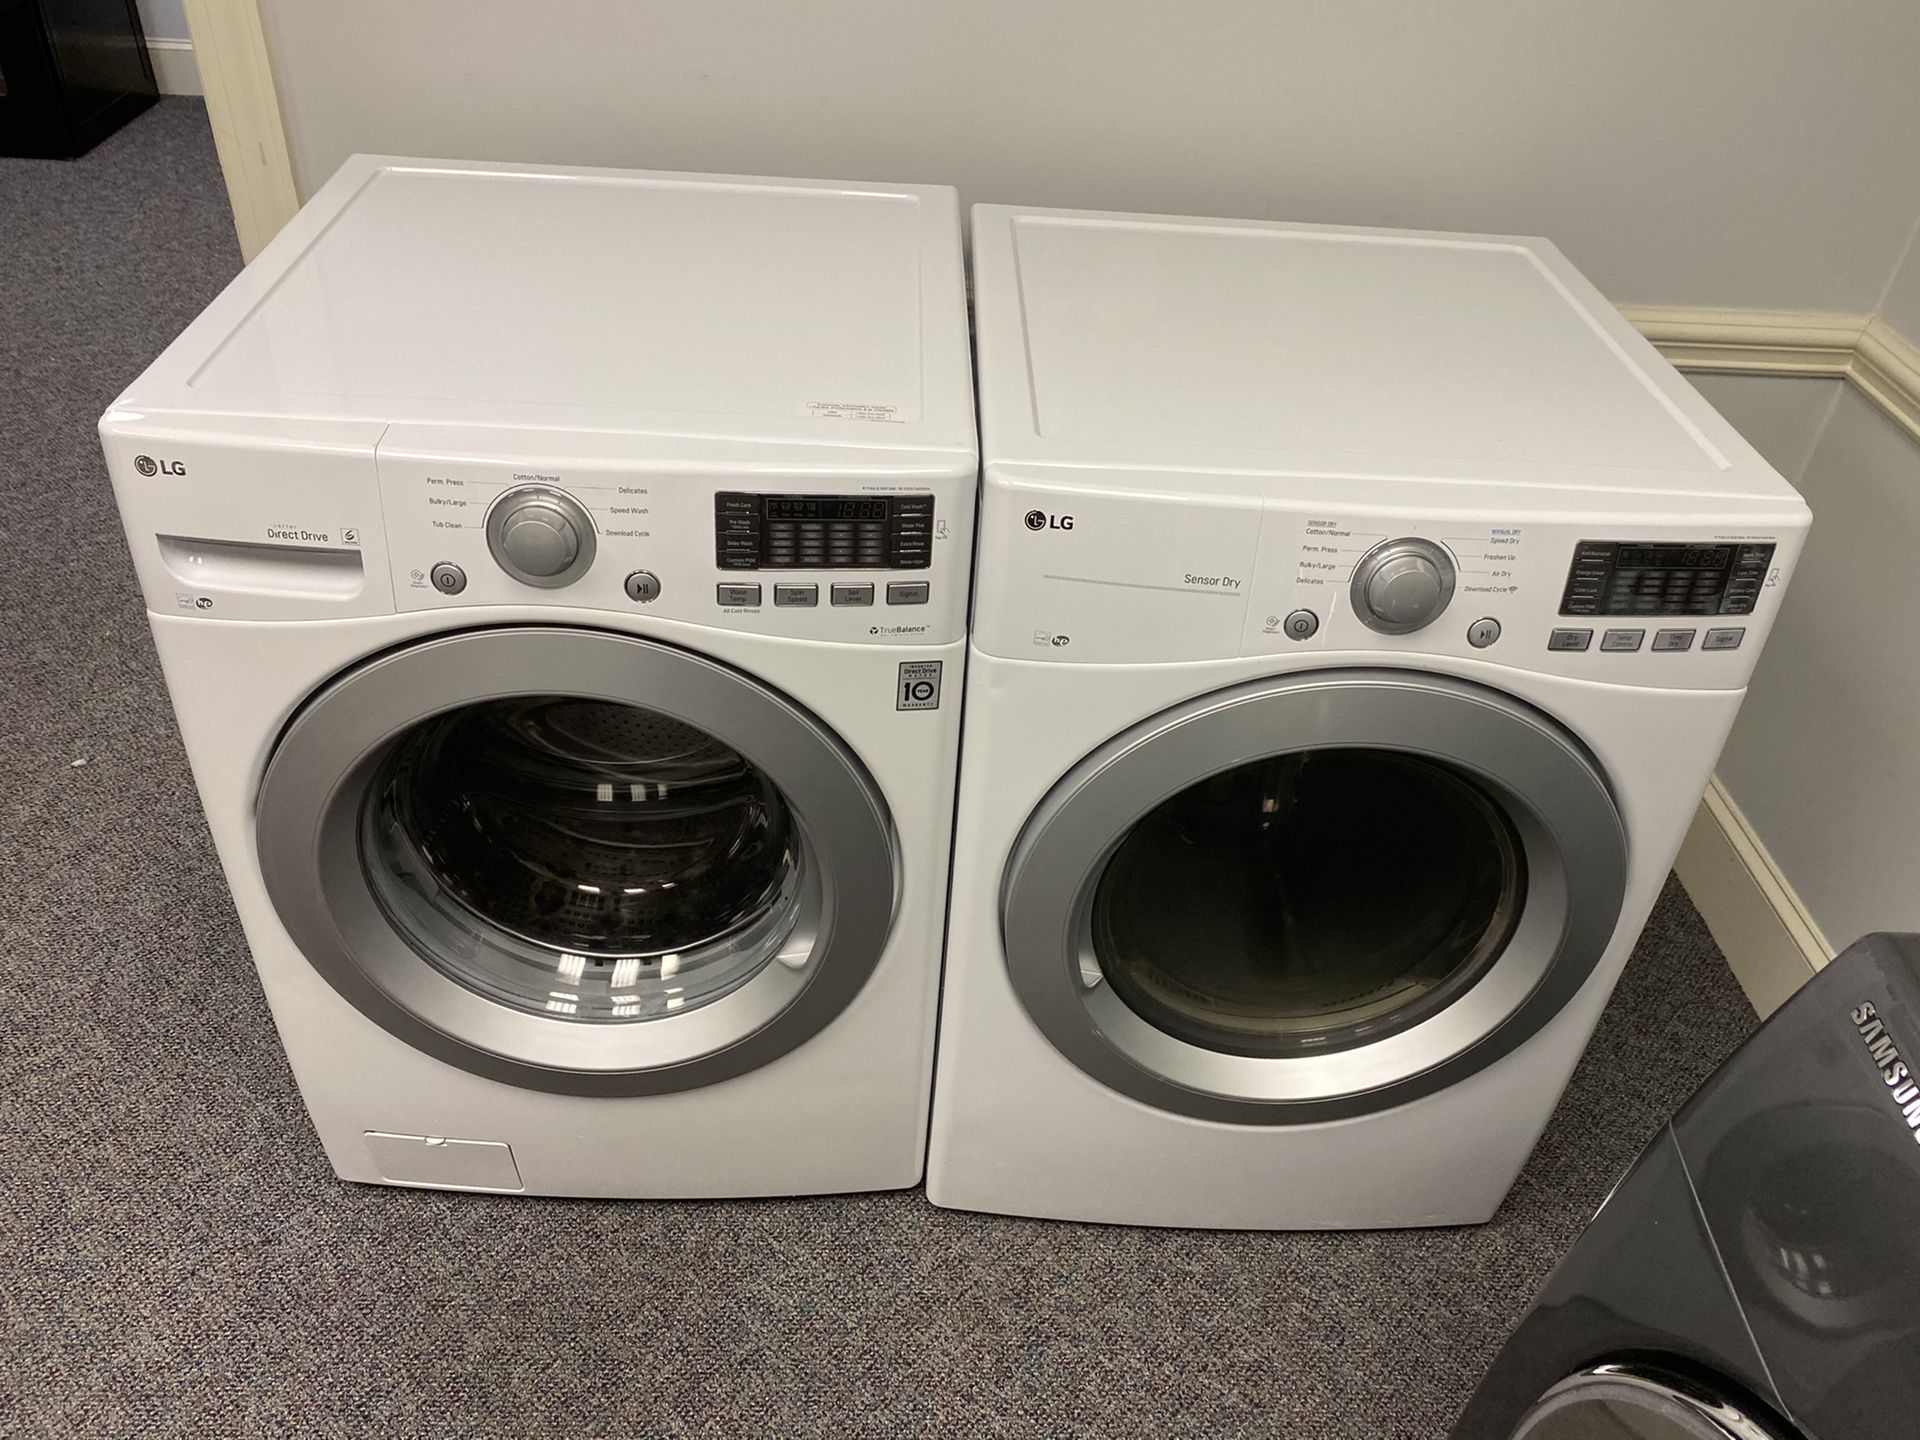 LG HIGH EFFICIENCY FRONT LOAD WASHER AND DRYER SET